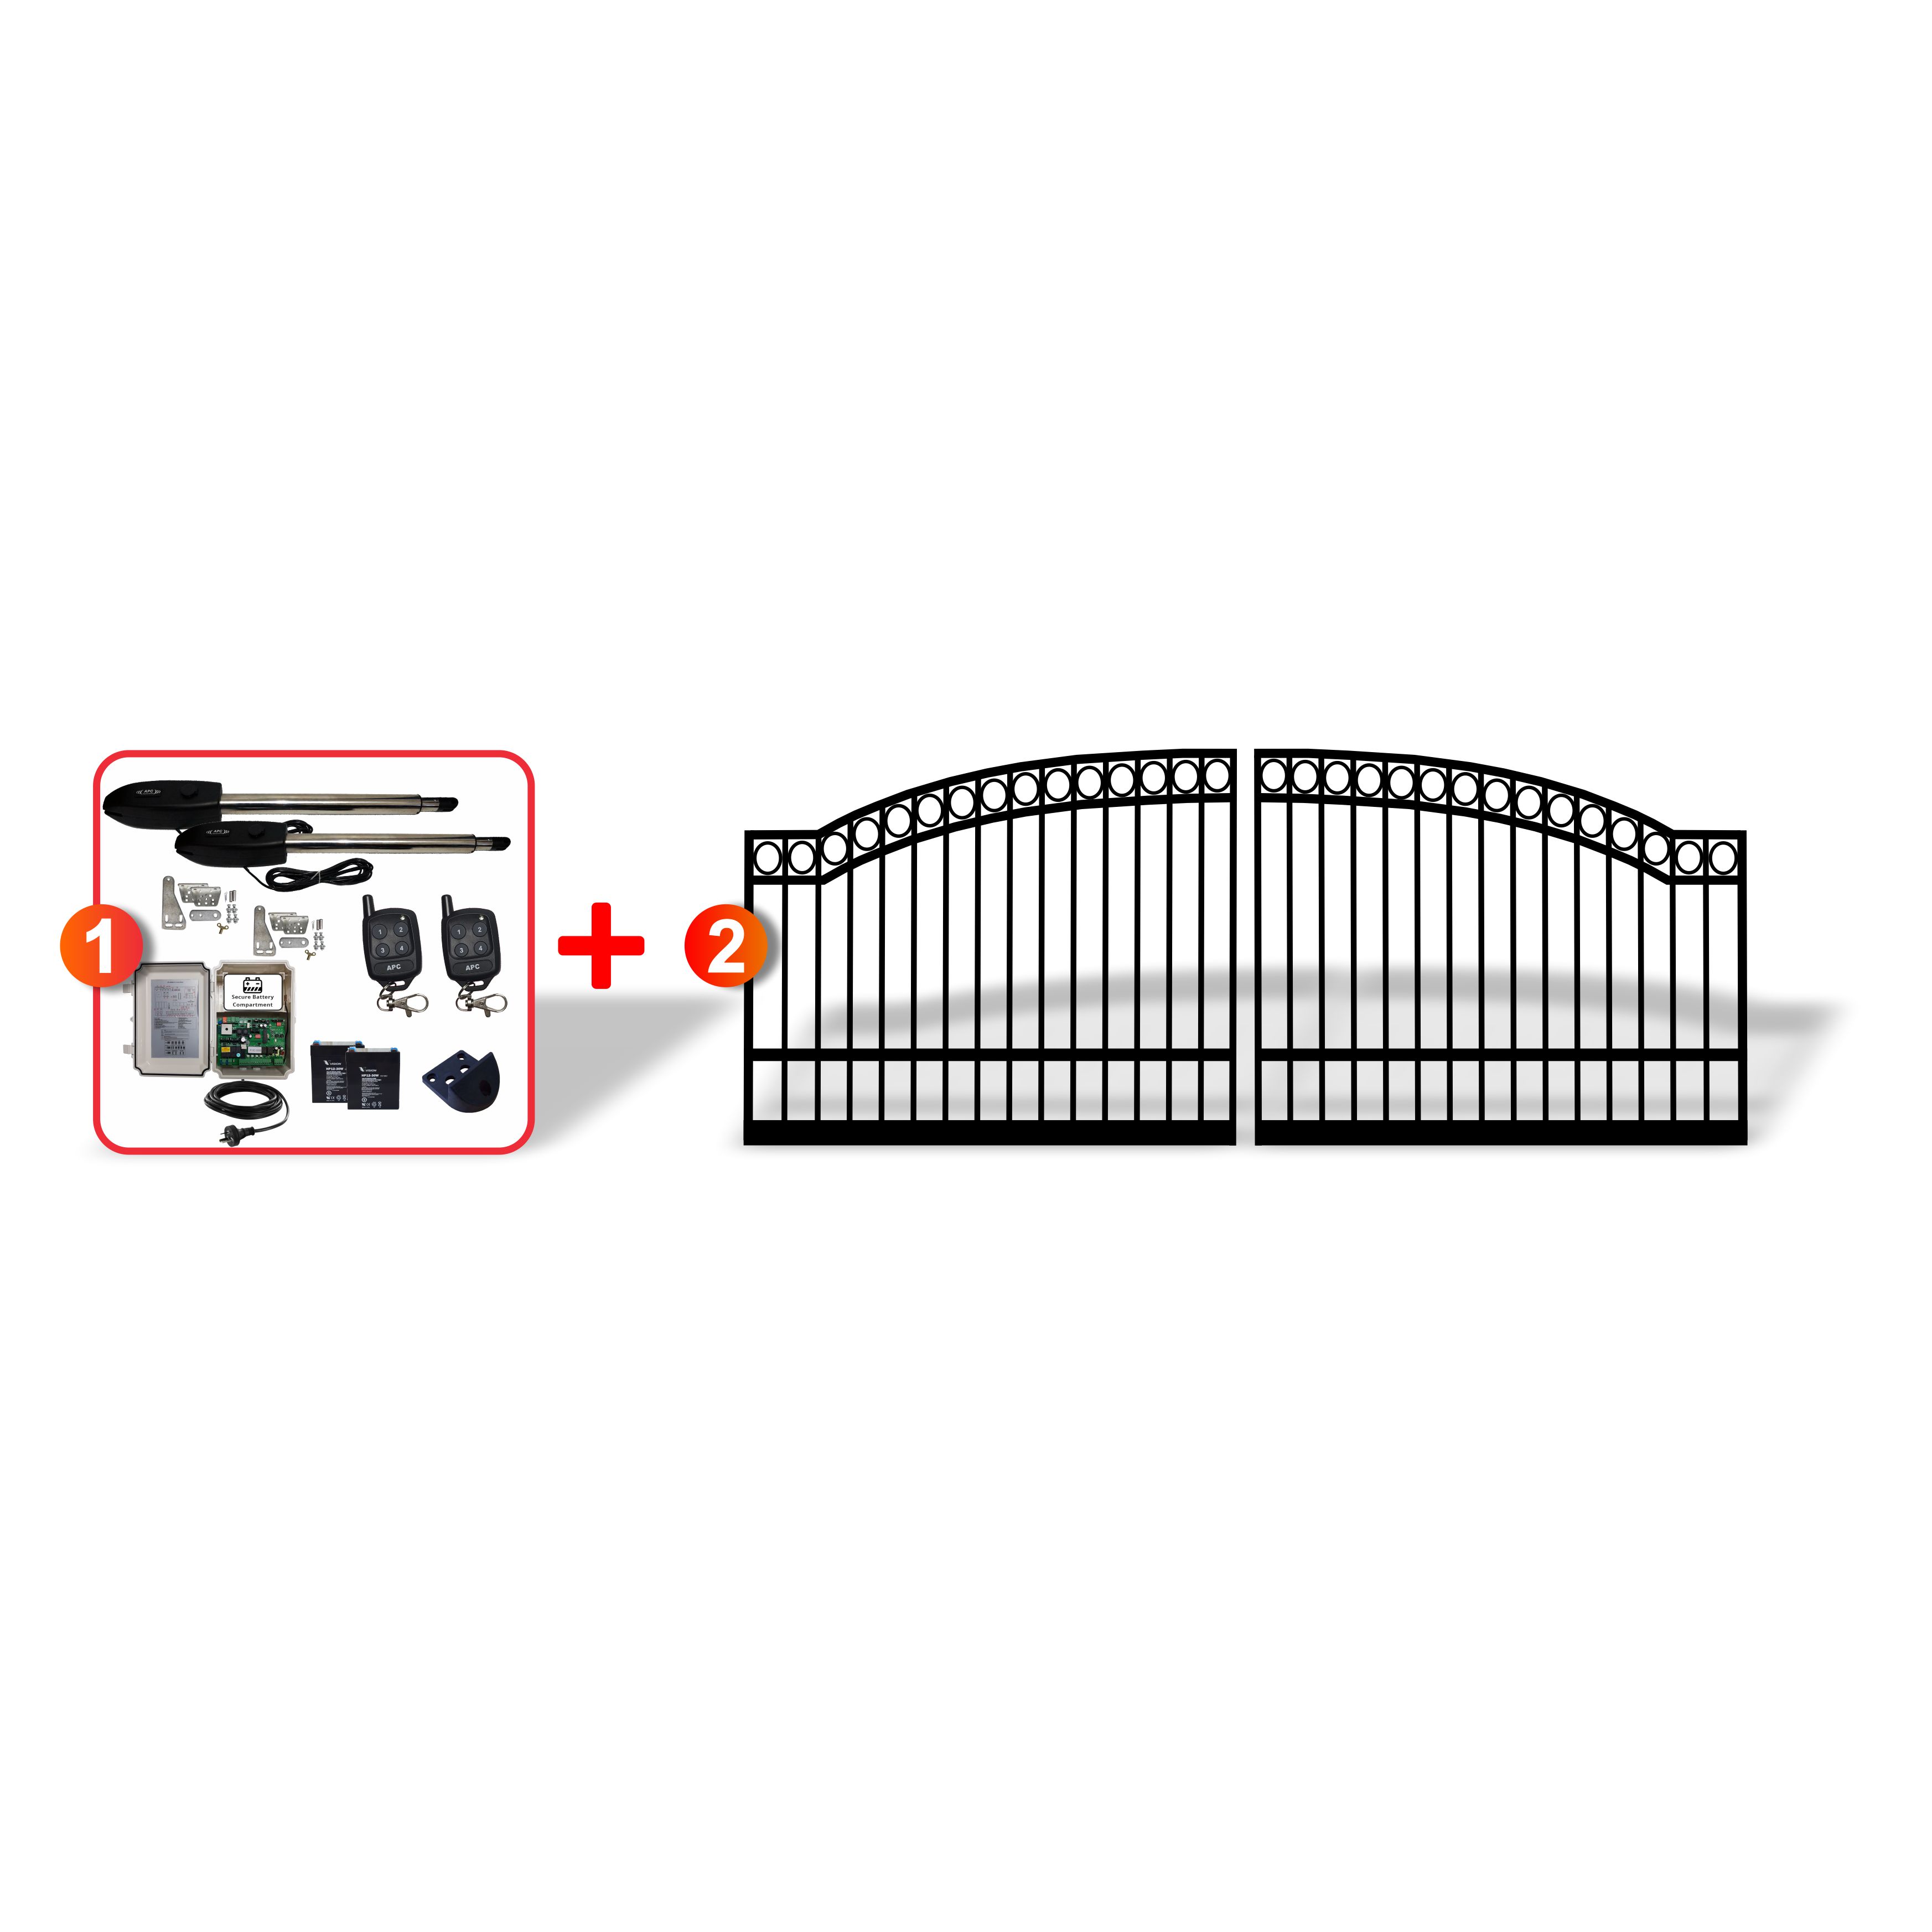 Double Swing Gate and Gate Opener Combo